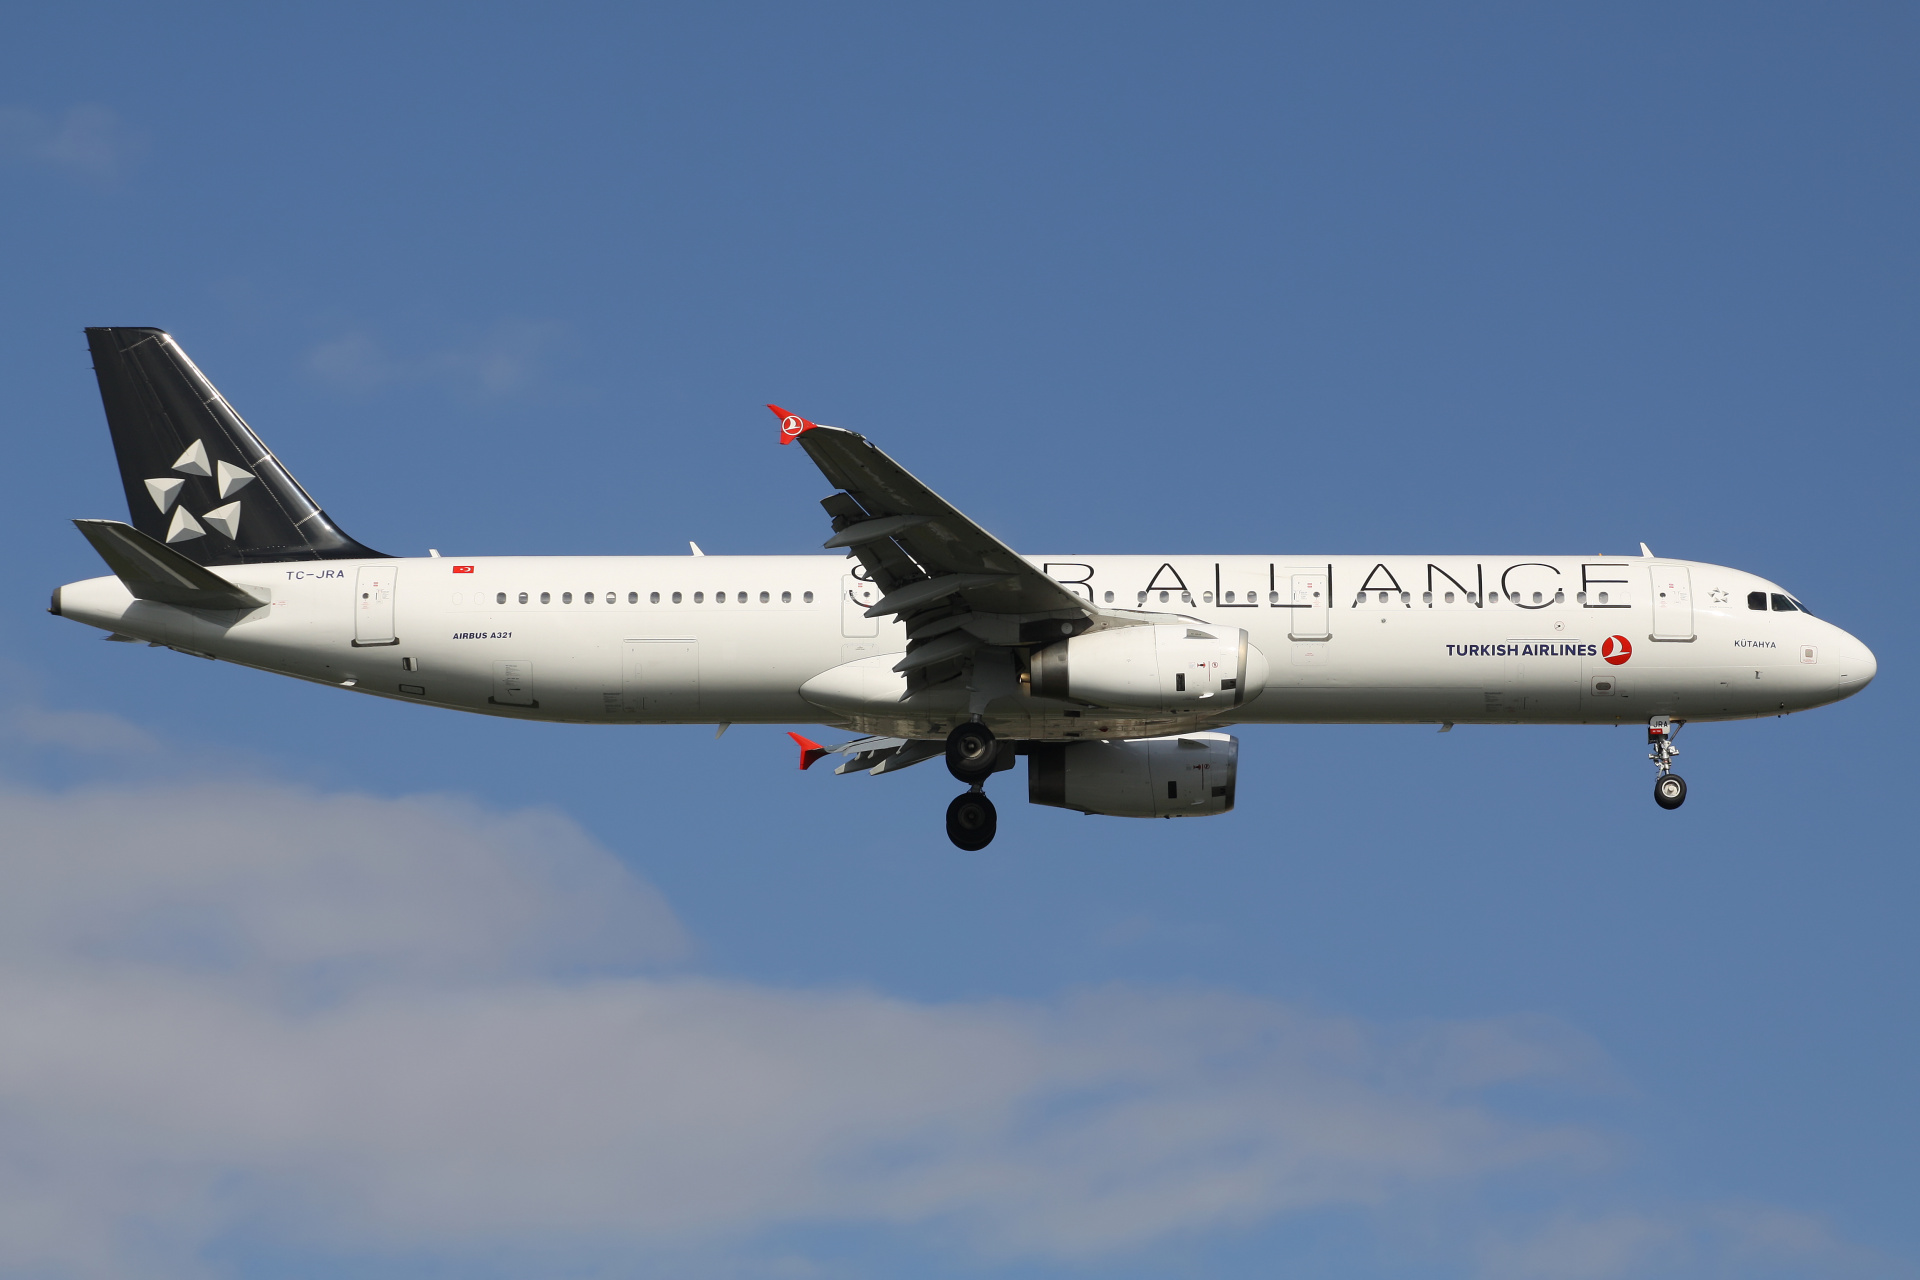 TC-JRA (Star Alliance livery) (Aircraft » Istanbul Atatürk Airport » Airbus A321-200 » THY Turkish Airlines)